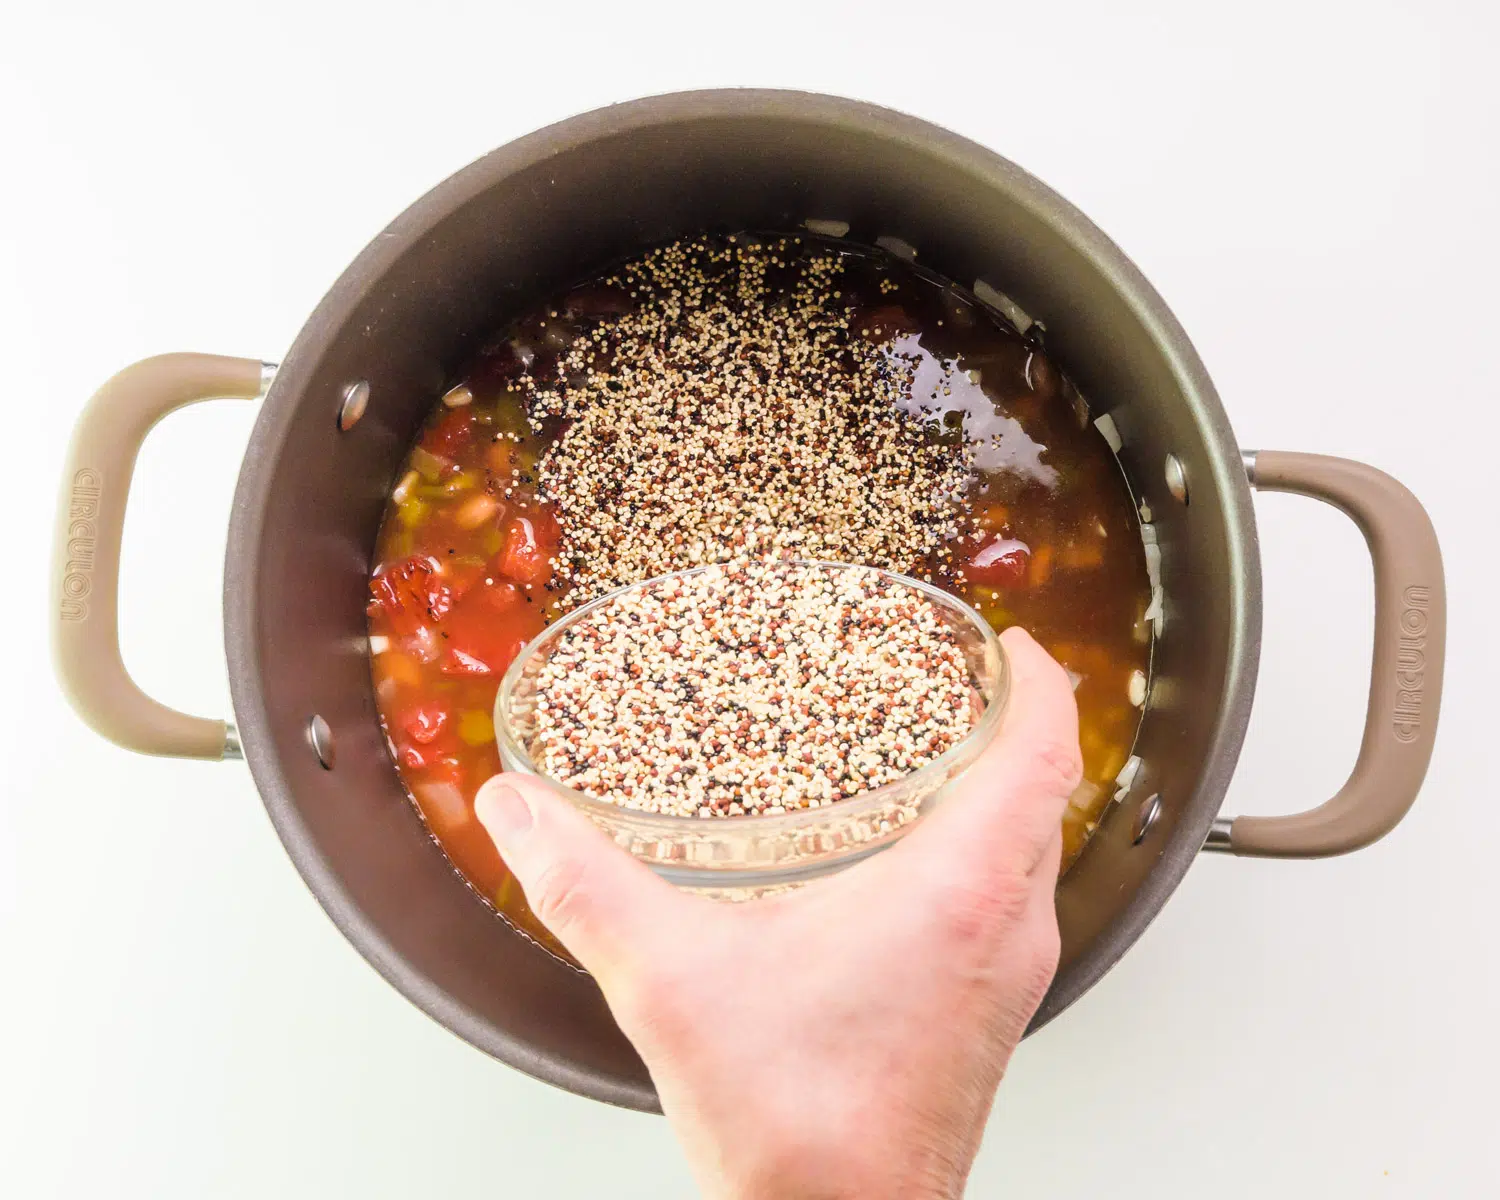 A hand holds a bowl of quinoa, adding it to a large pot with other ingredients.